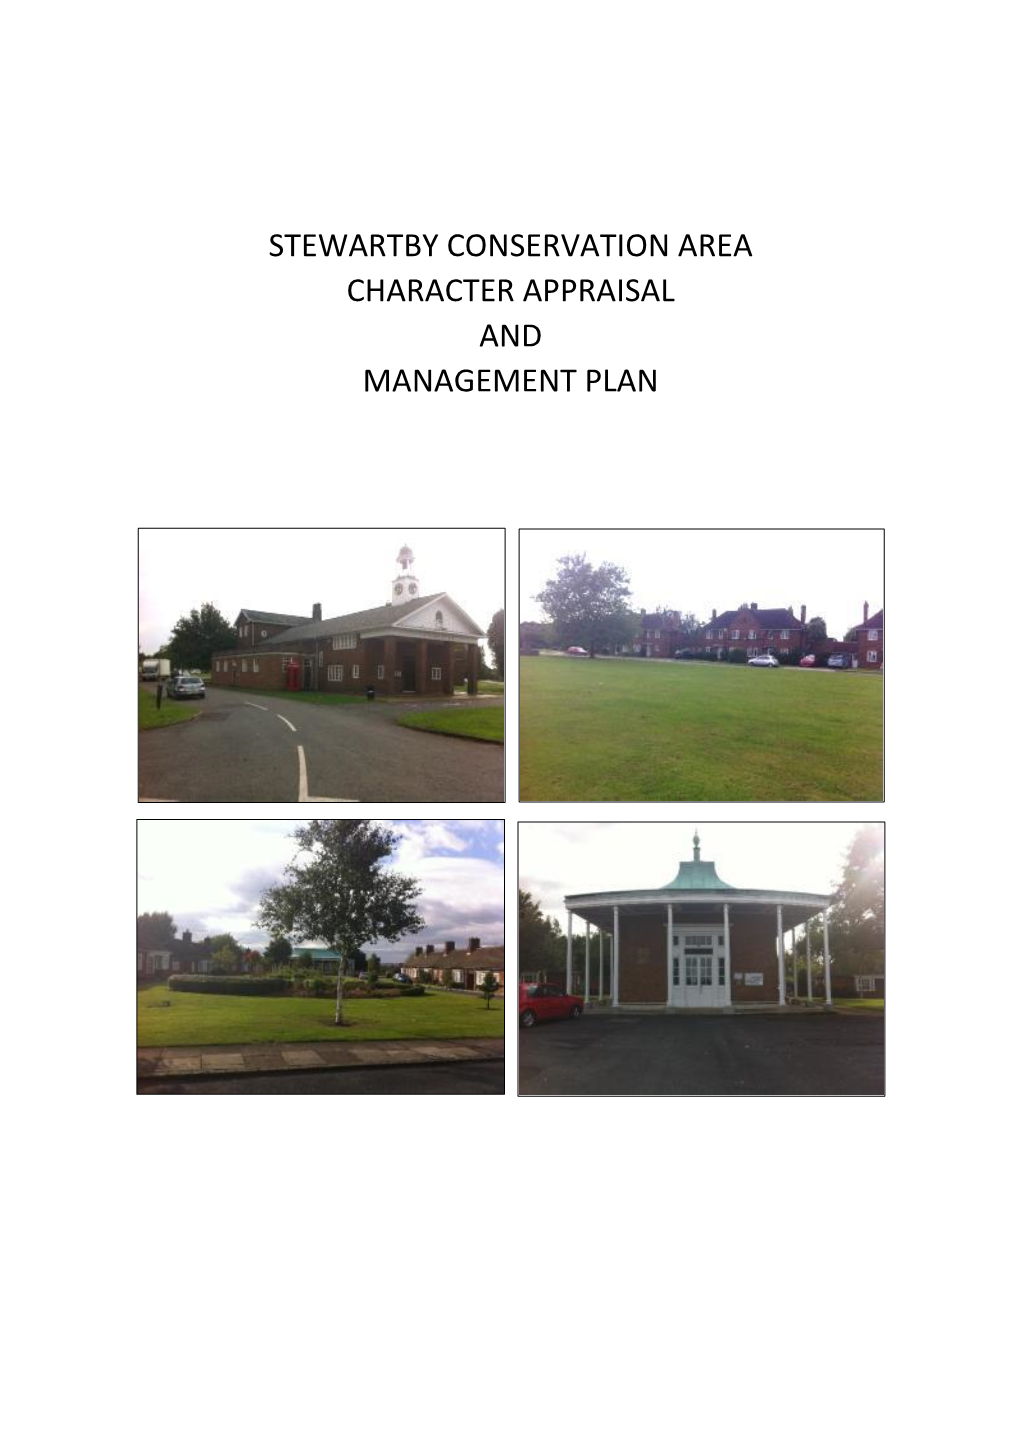 Stewartby Conservation Area Character Appraisal and Management Plan